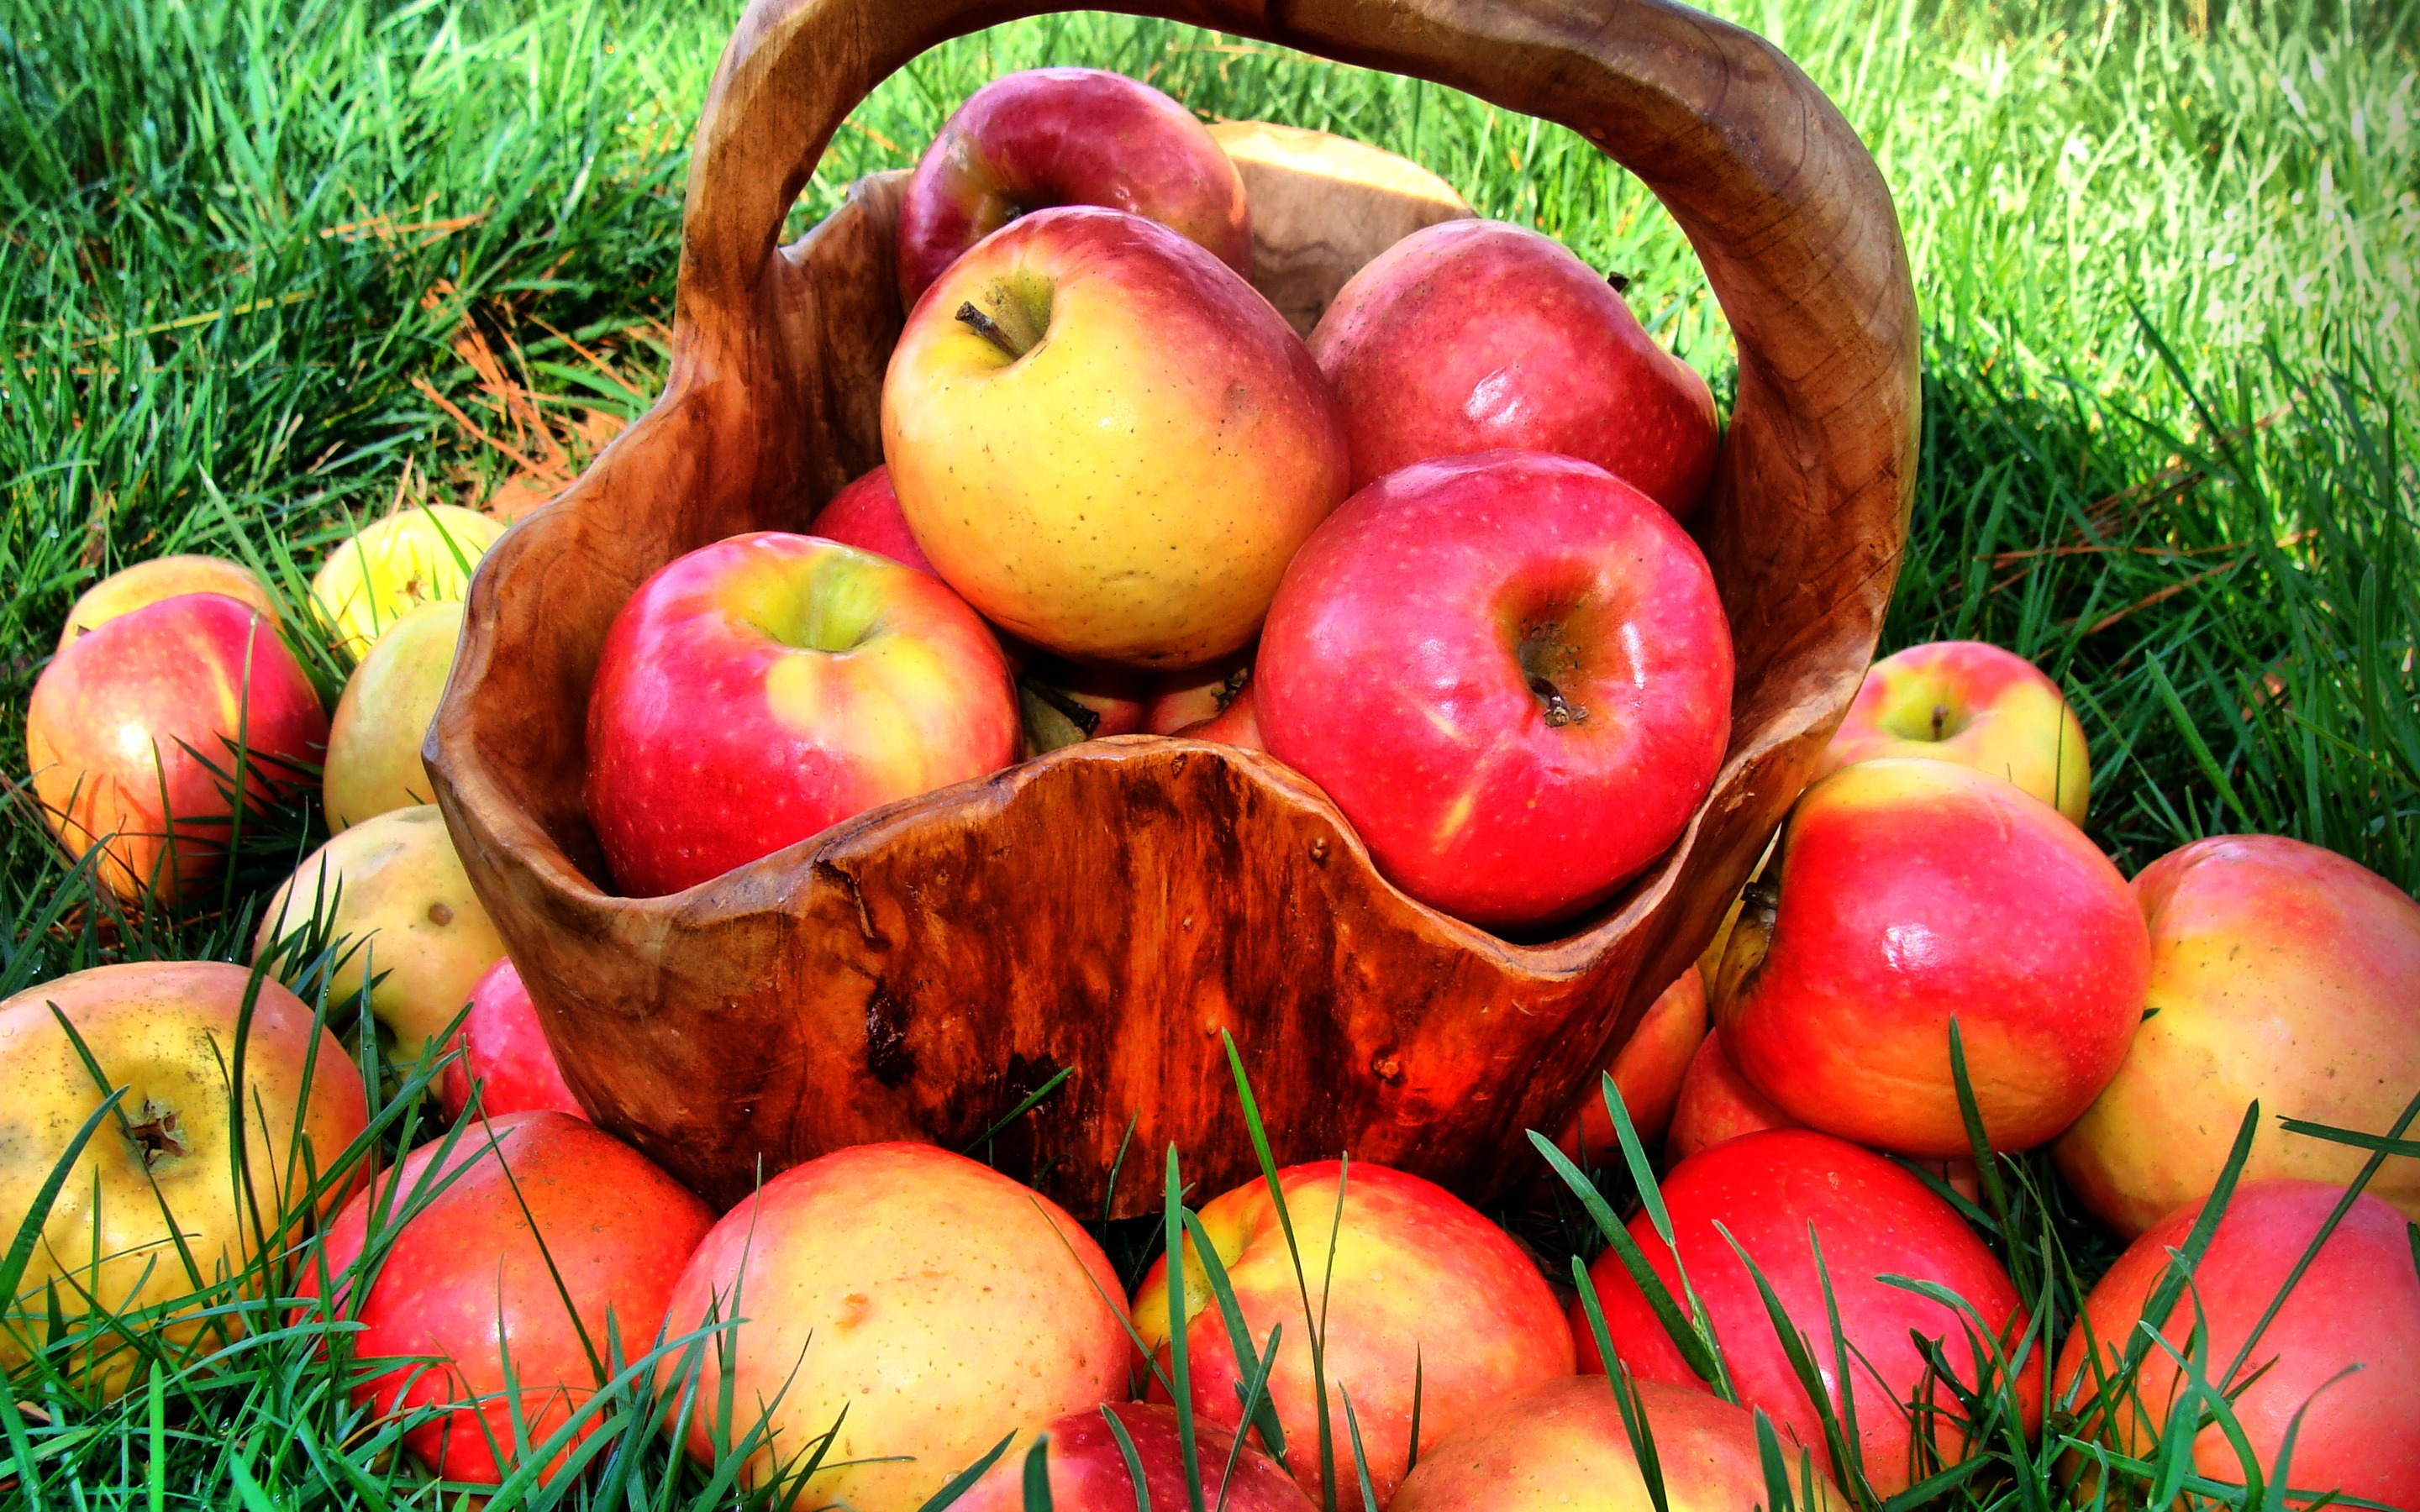 Natural Apples for 2880 x 1800 Retina Display resolution